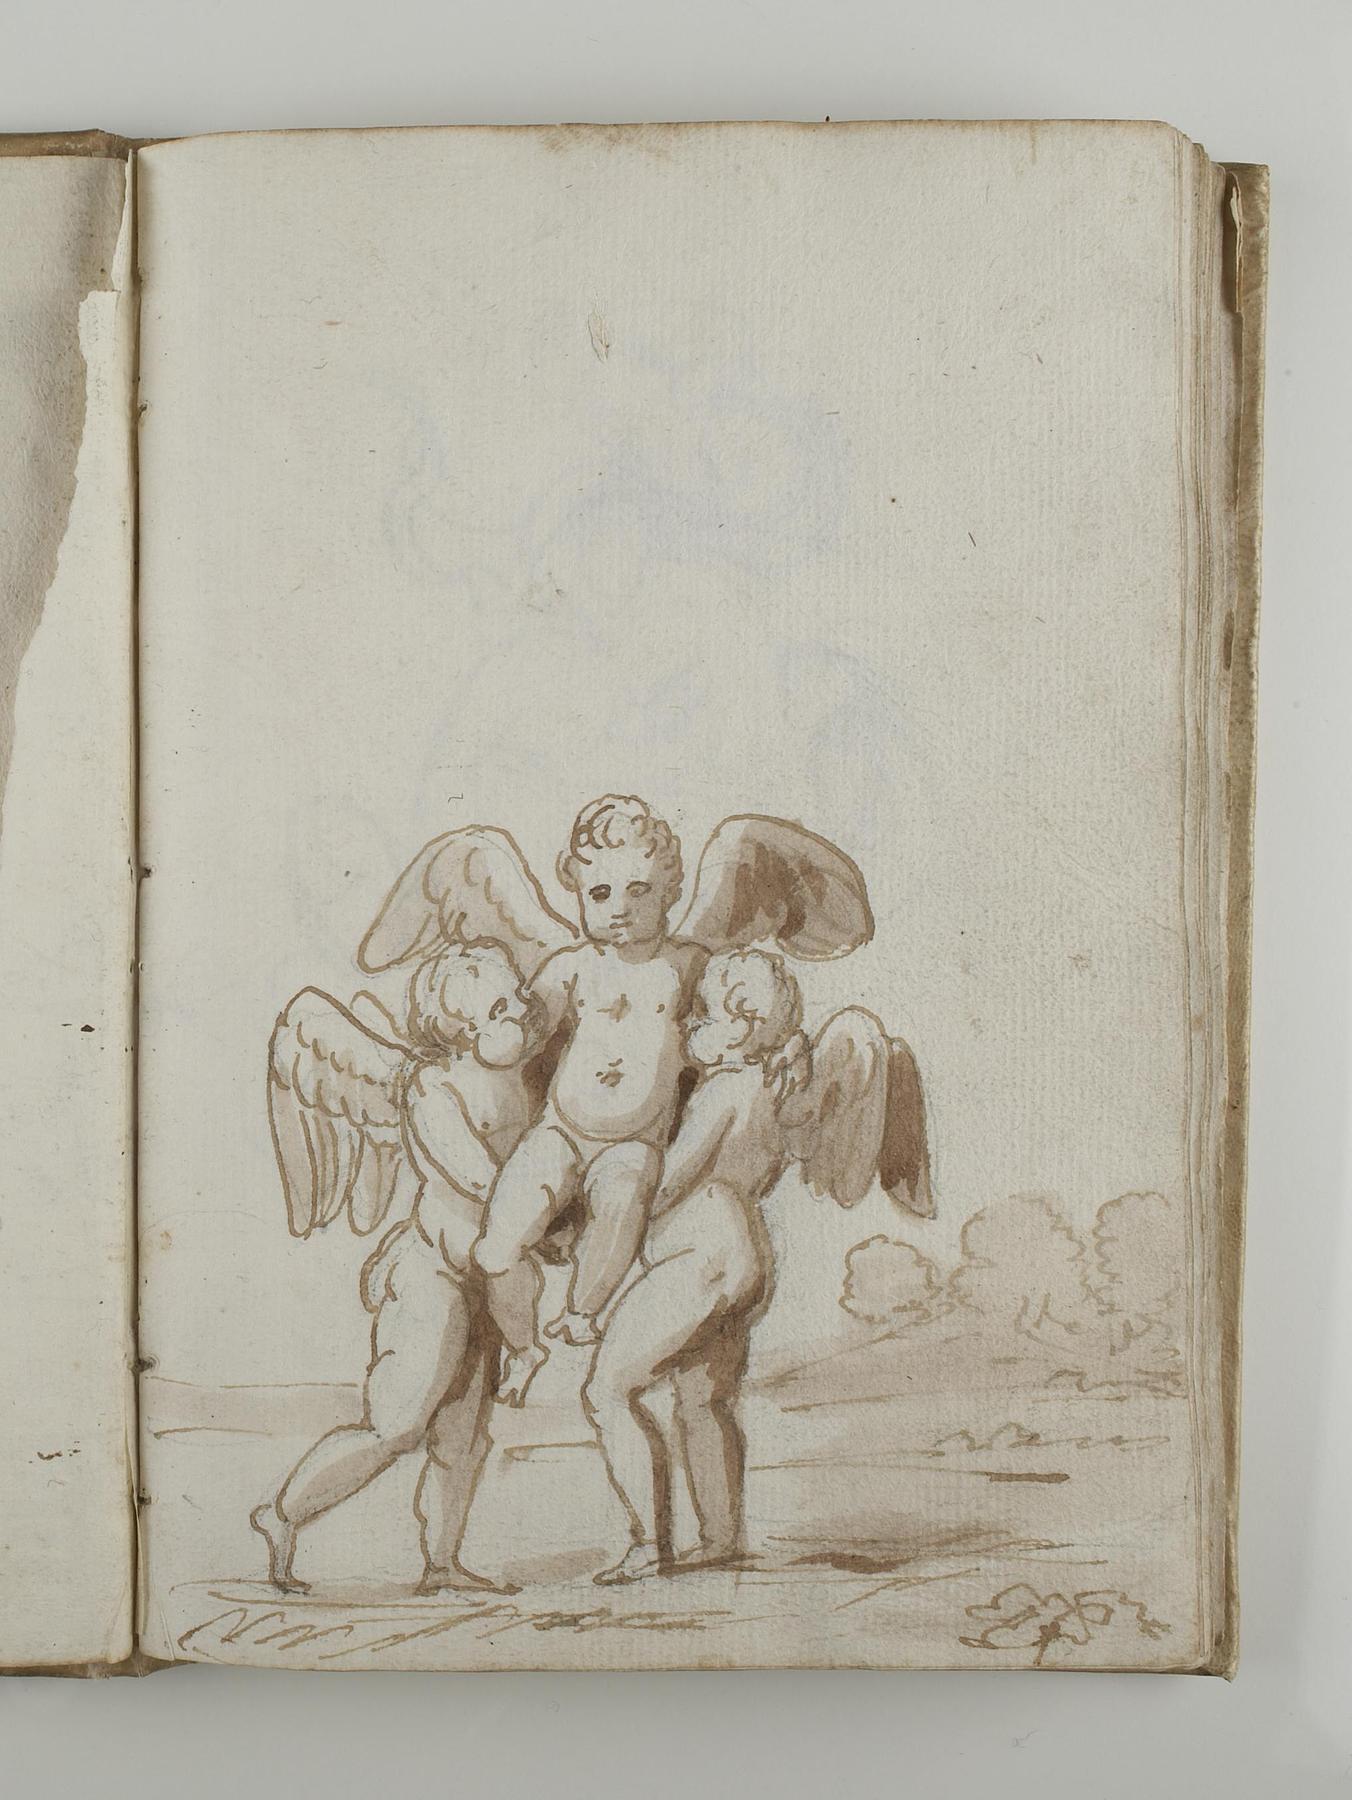 Two Cupids Carry a Third Cupid in a Gold Chair, C563,79v